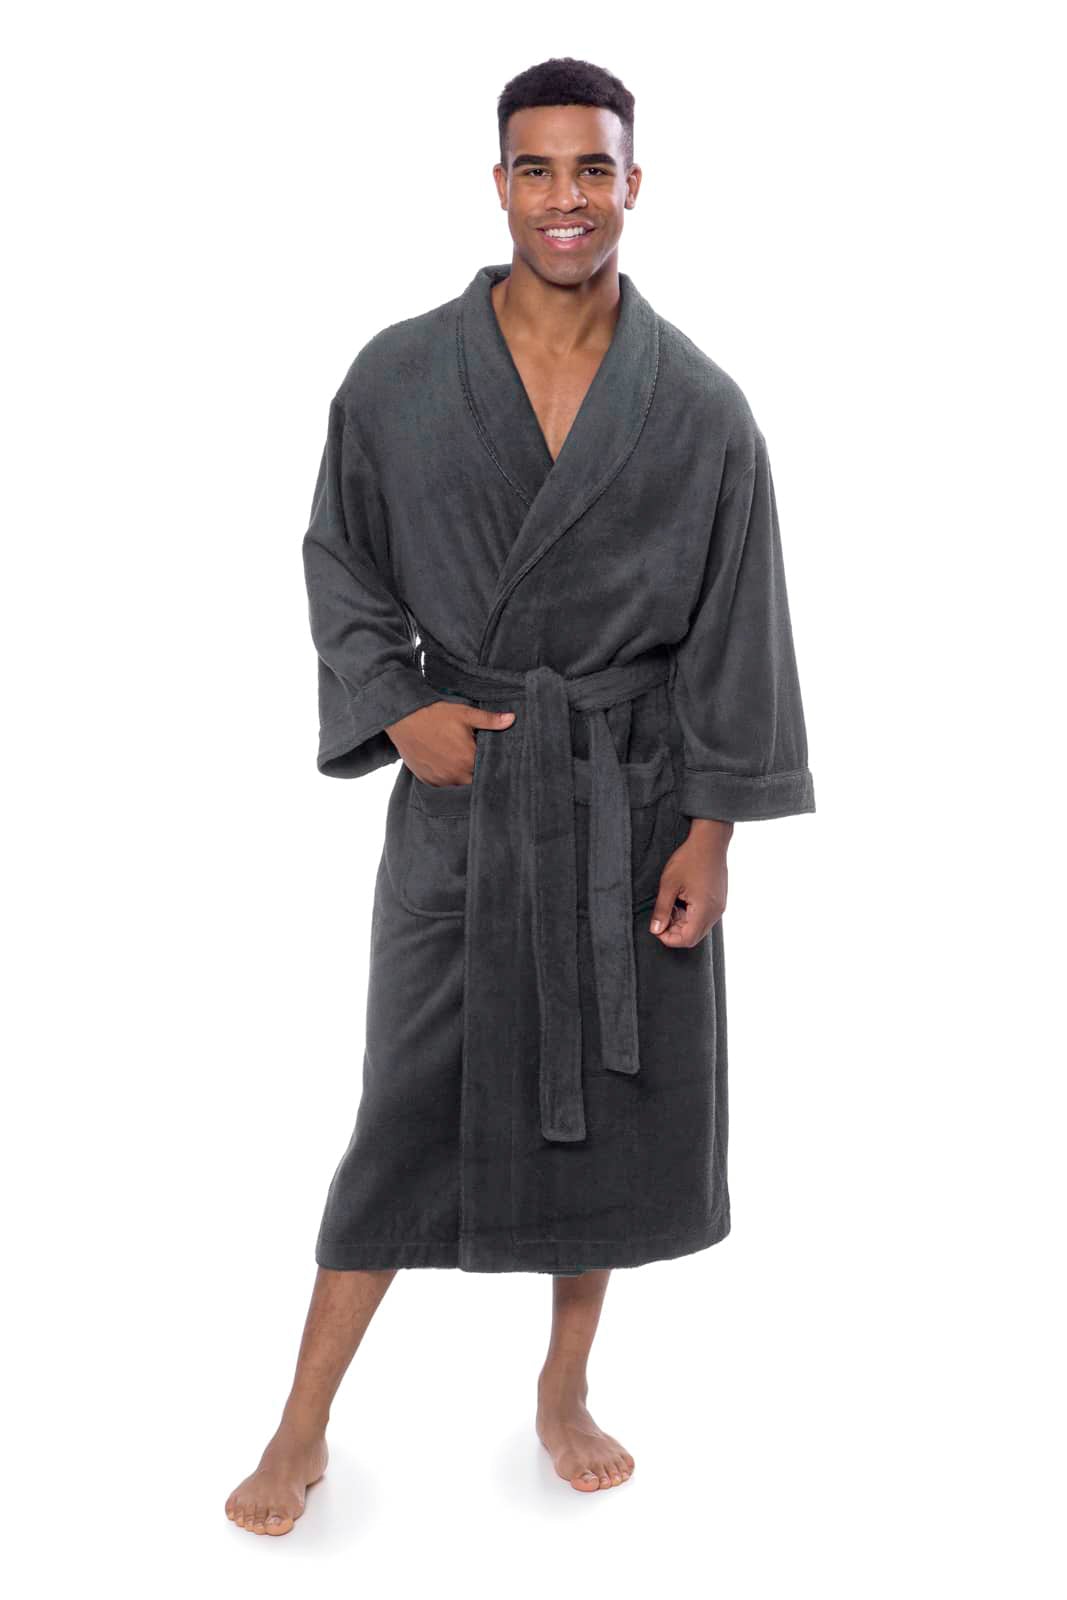 Men\'s Bathrobe | Texere Long Terry Cloth Plush Robes | Fishers Finery